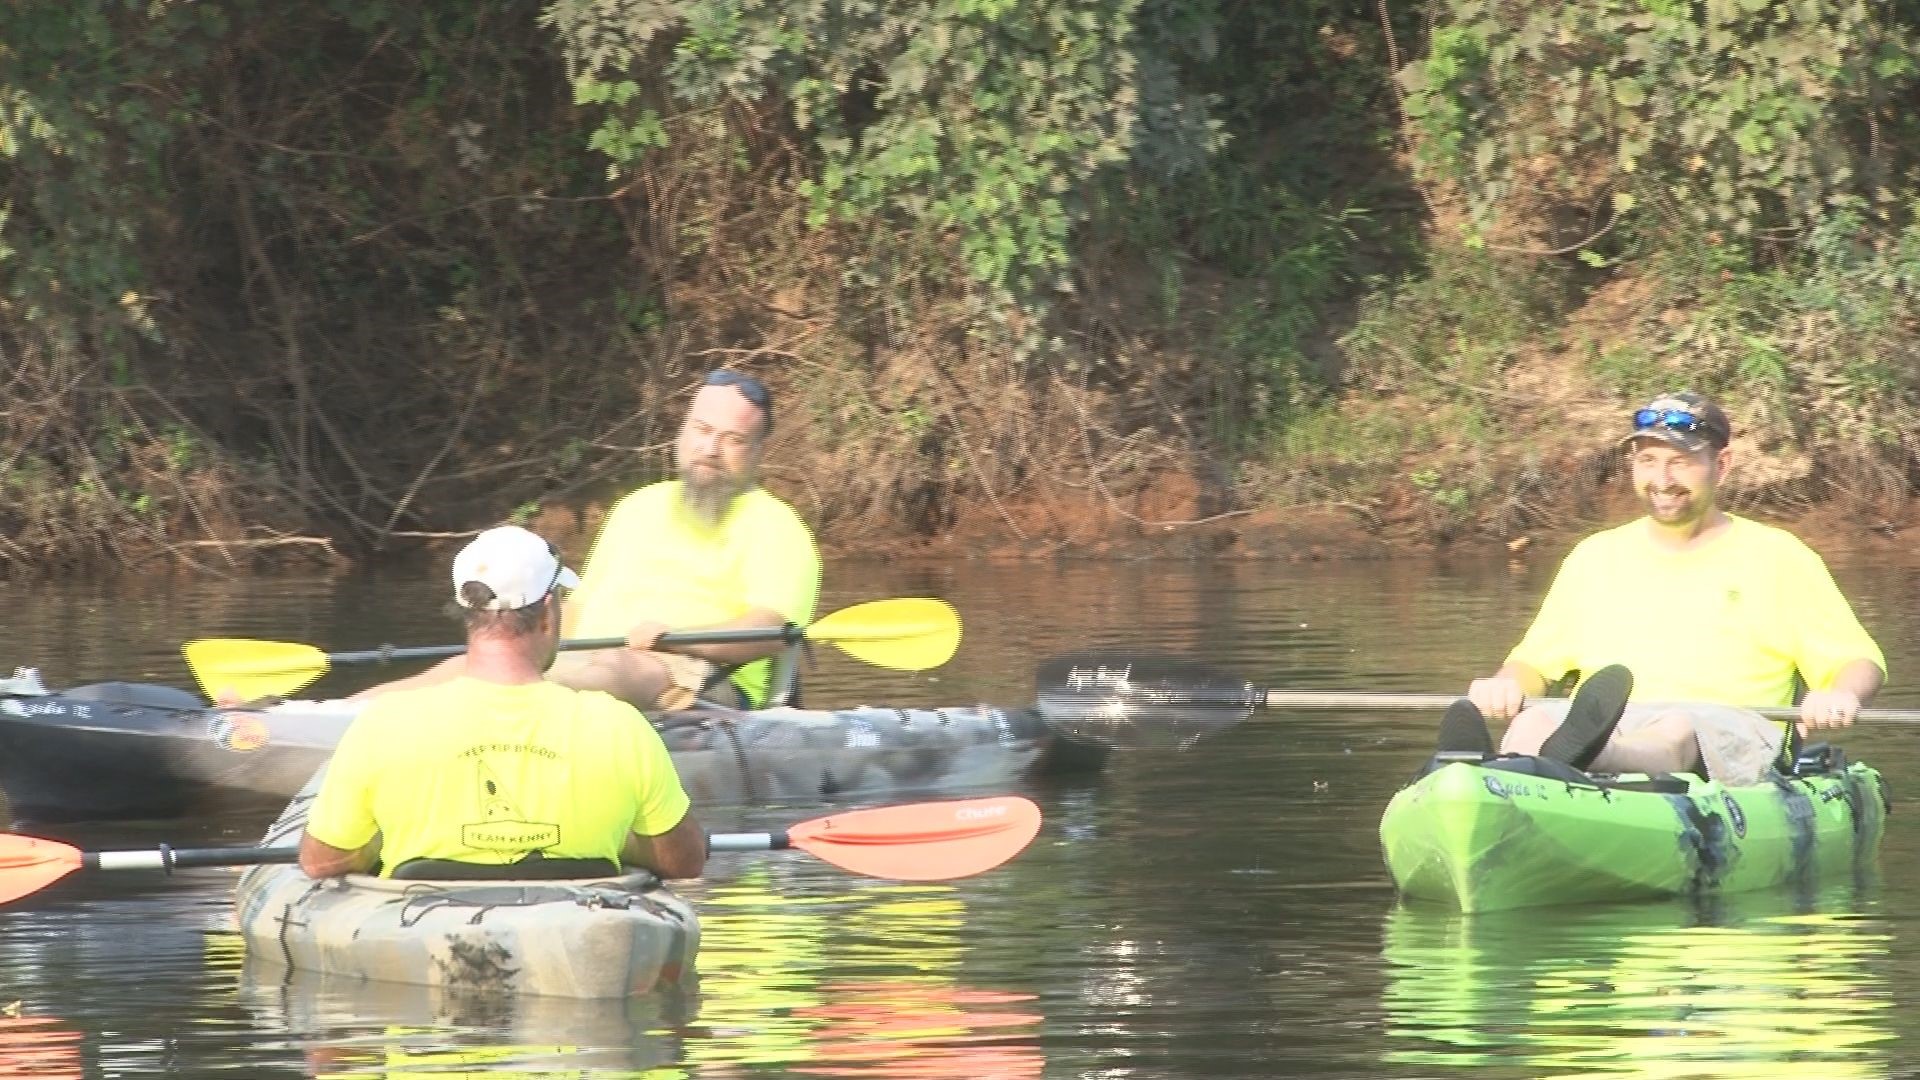 The Wet Neck Yak Club is holding a community float down the Oconee River to raise money for their member, Kenneth Waller.